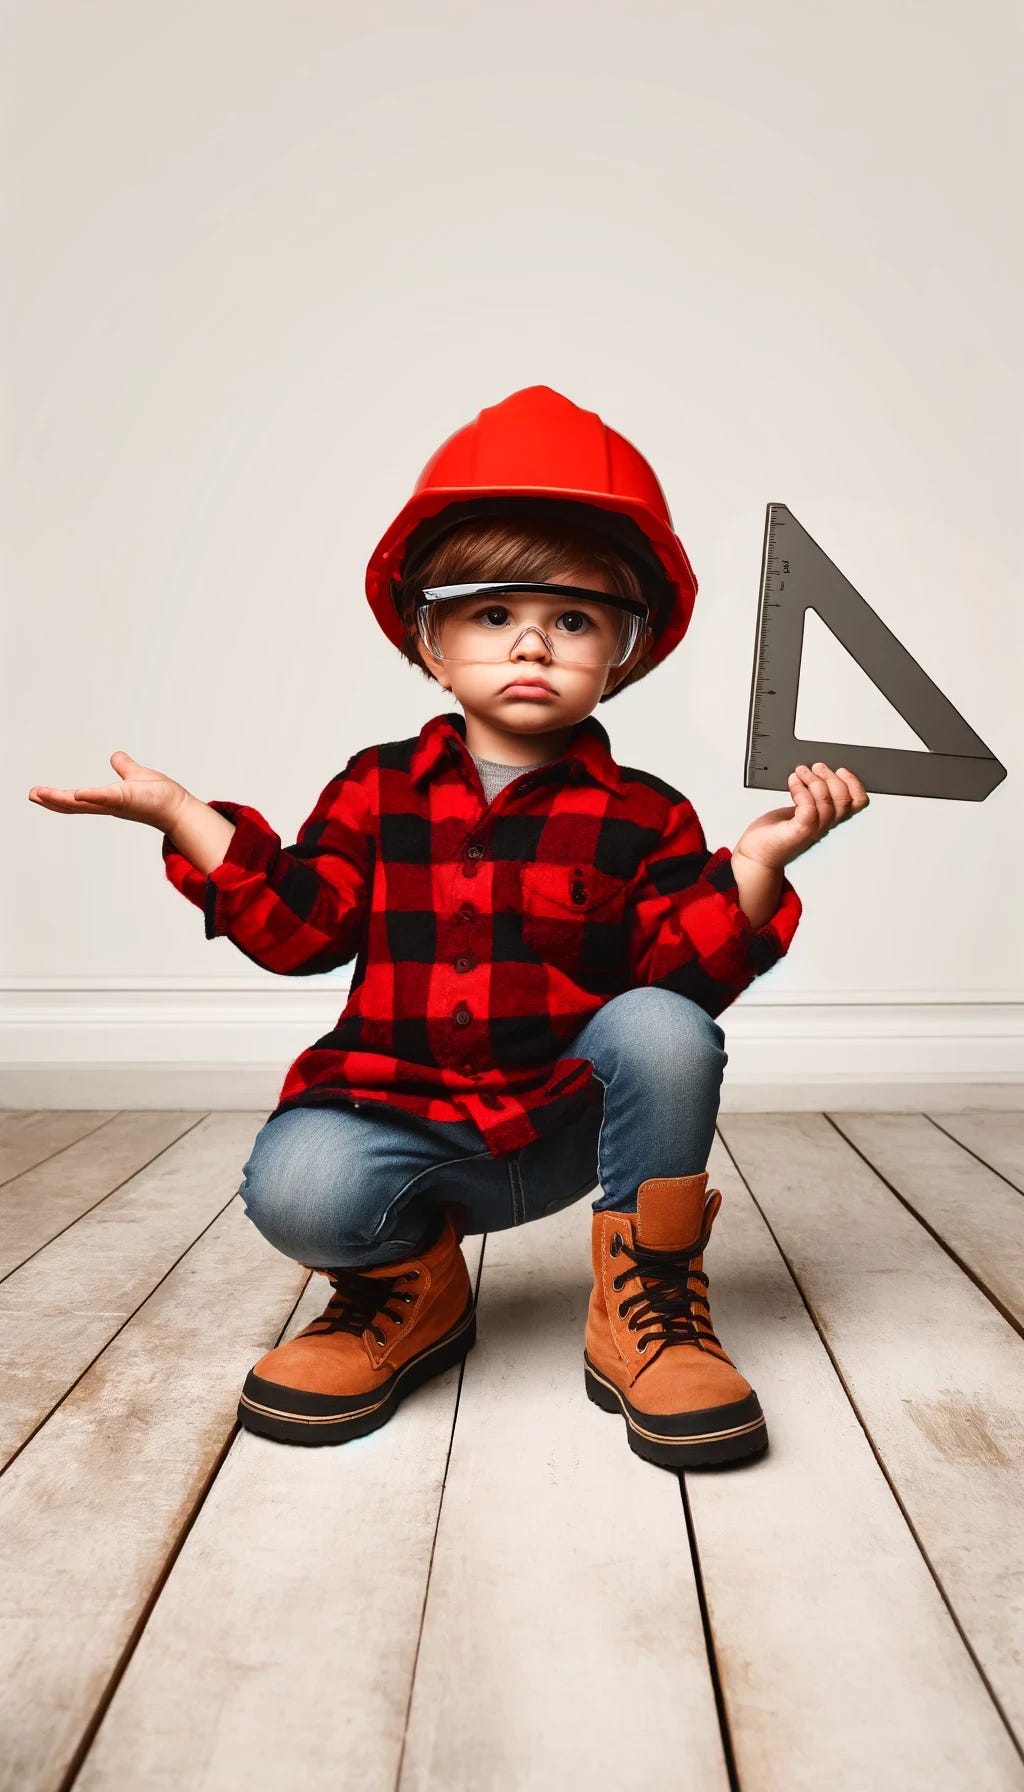 A pre-school aged boy wearing a red and black flannel shirt, blue jeans, work boots, a hard hat, and safety glasses. He is holding up a triangle-shaped grey, metal speed square with a confused look on his face.